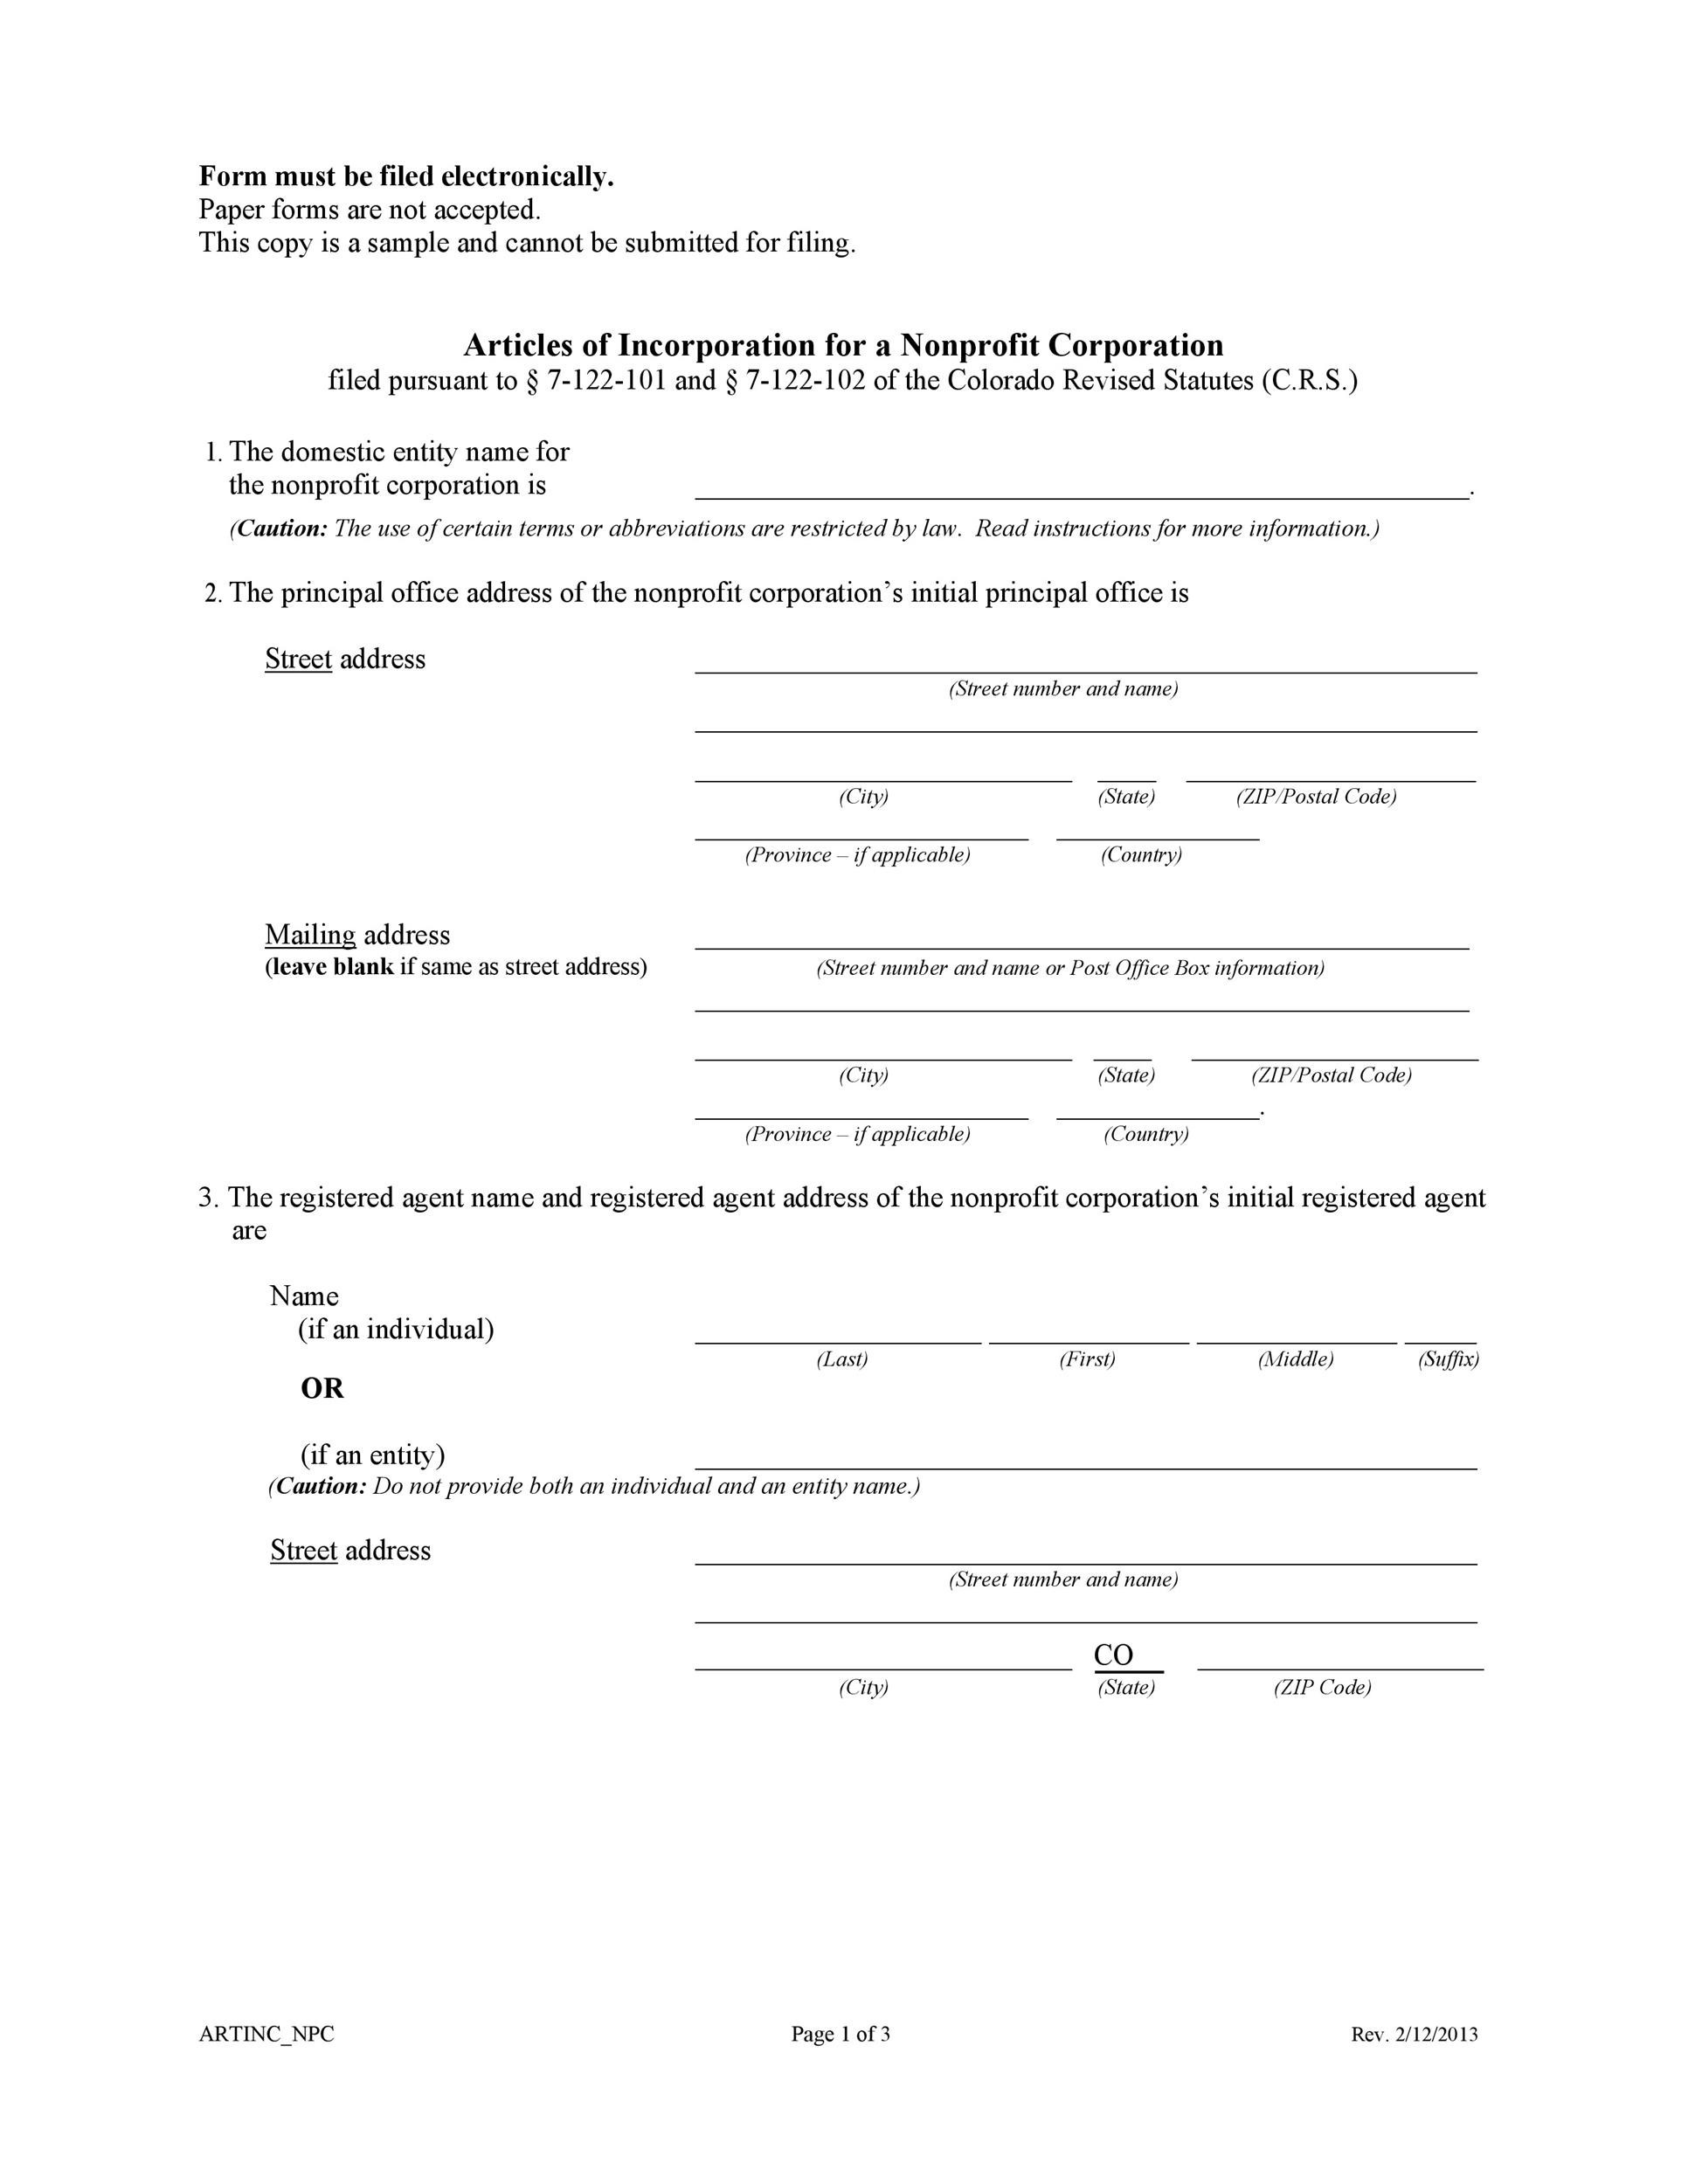 Free articles of incorporation template 28